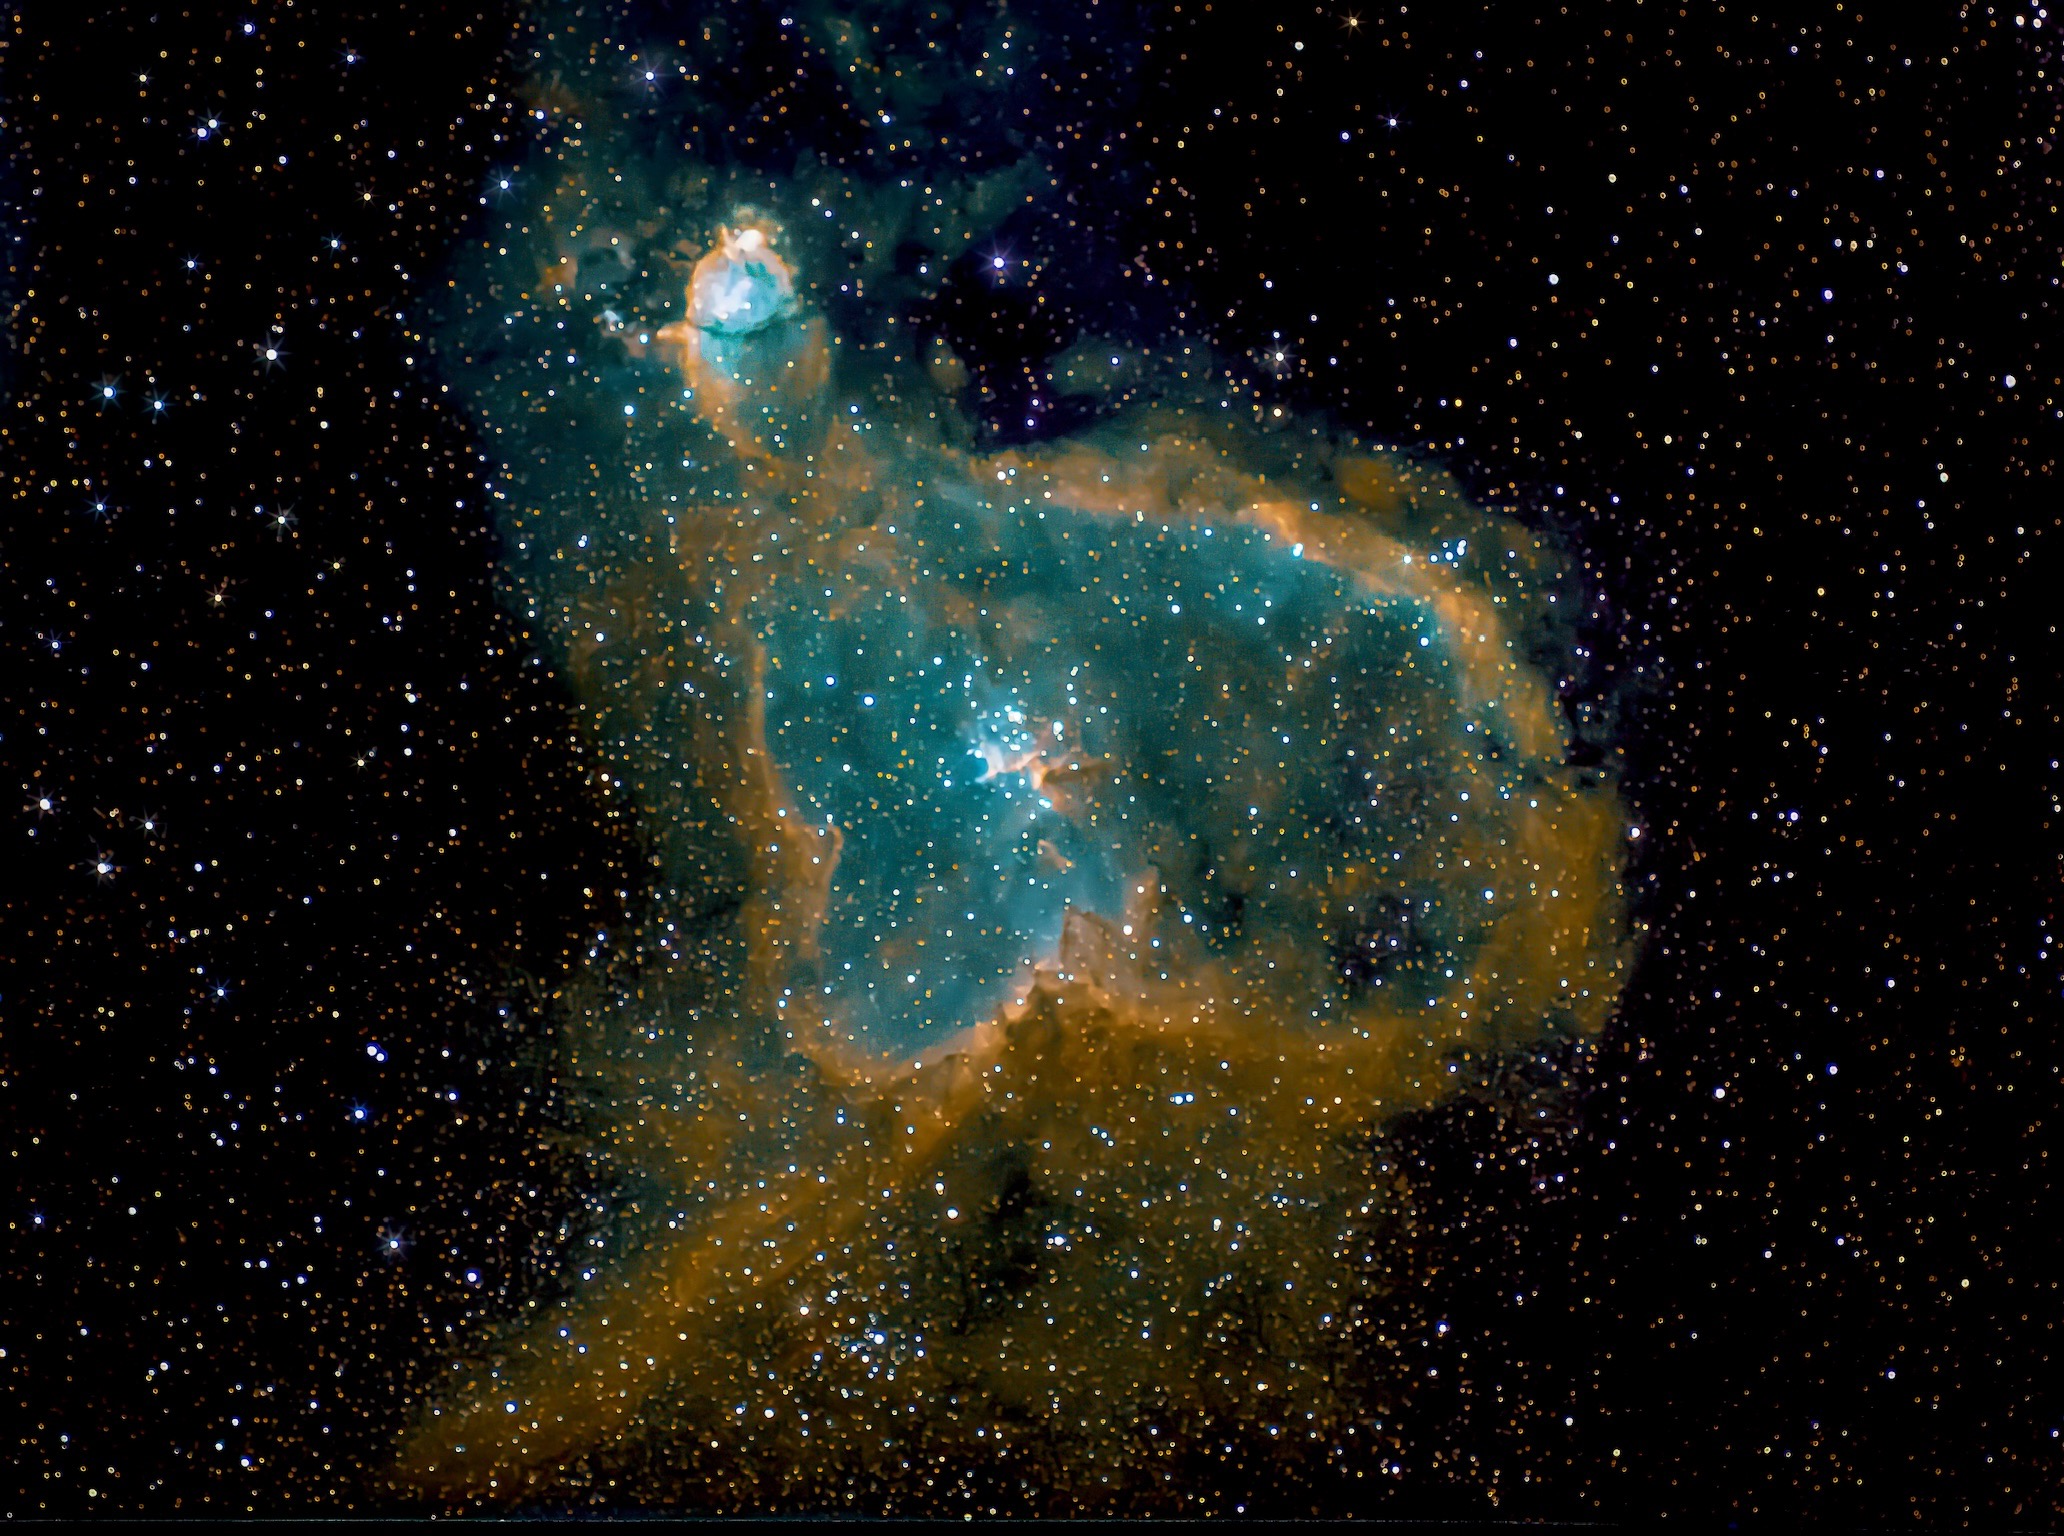 The Heart Nebula (IC 1805) is a large emission nebula in the constellation Cassiopeia. The beauty of this iconic astrophotography target is due to its mix of both bright hydrogen gas, and dark dust clouds. This glowing nebula gets its nickname from the familiar shape it resembles and is located approximately 7,500 light-years from Earth.